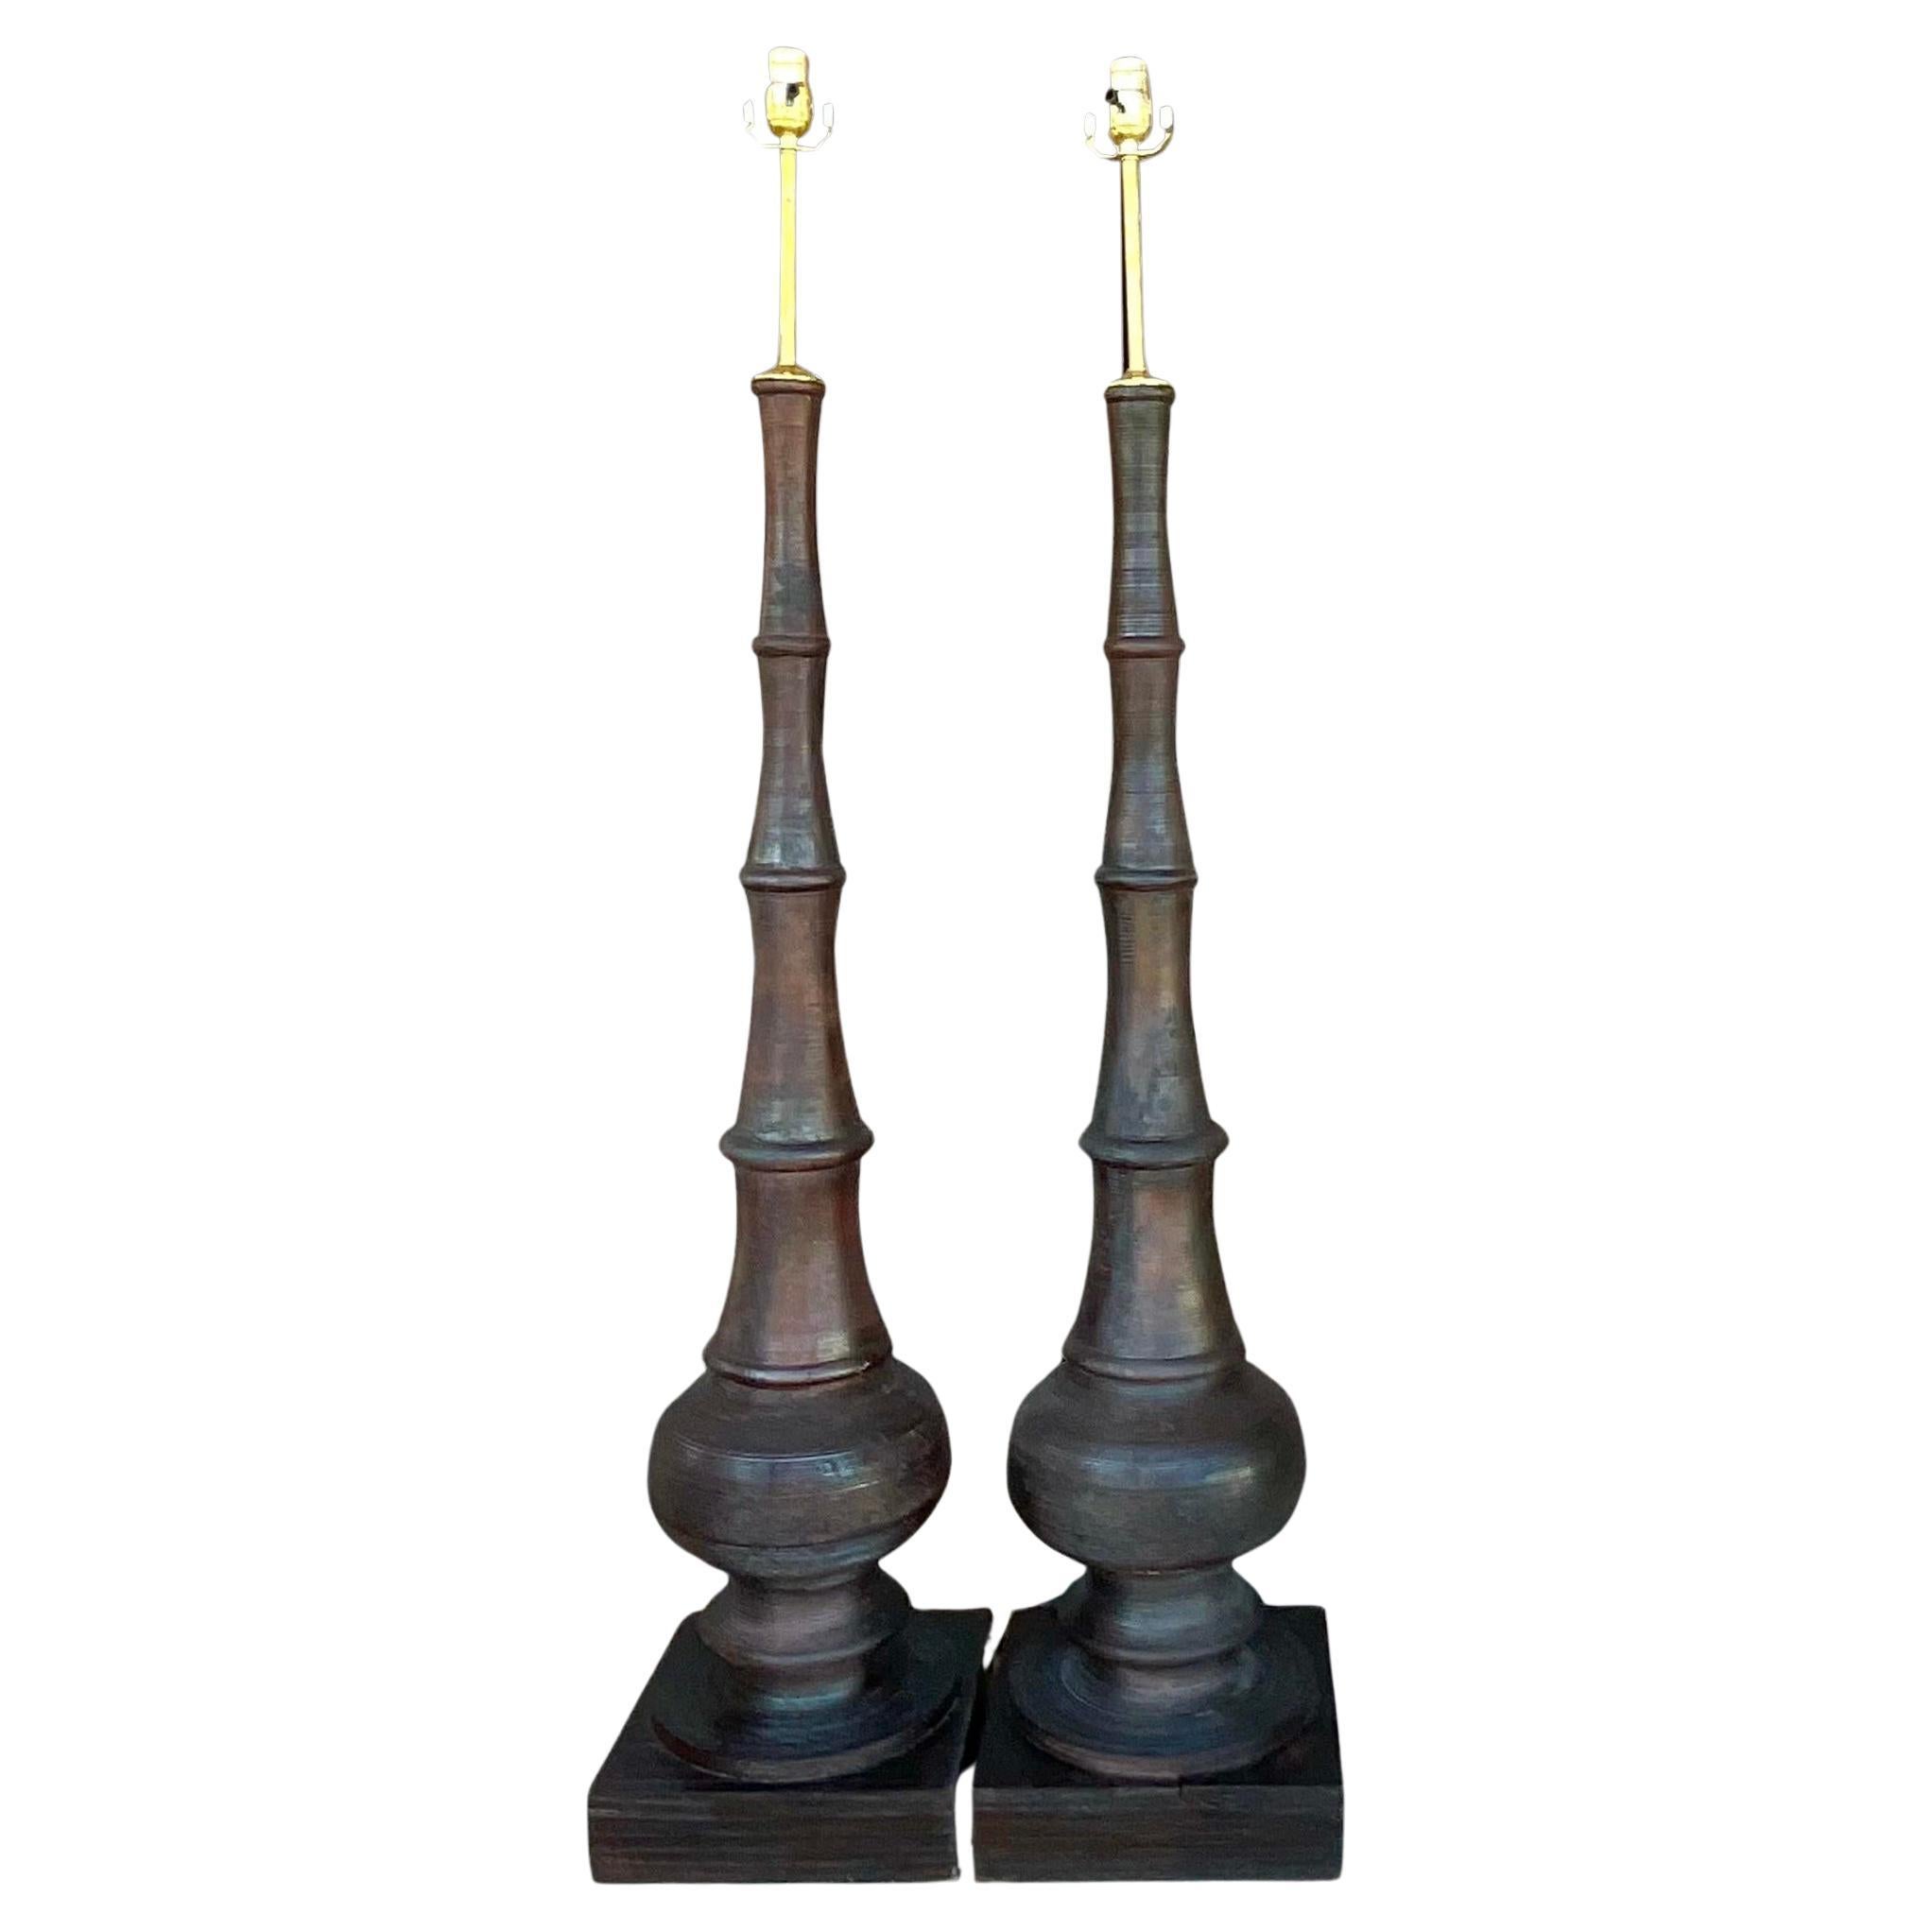 Vintage Coastal Reed Floor Lamps - a Pair For Sale